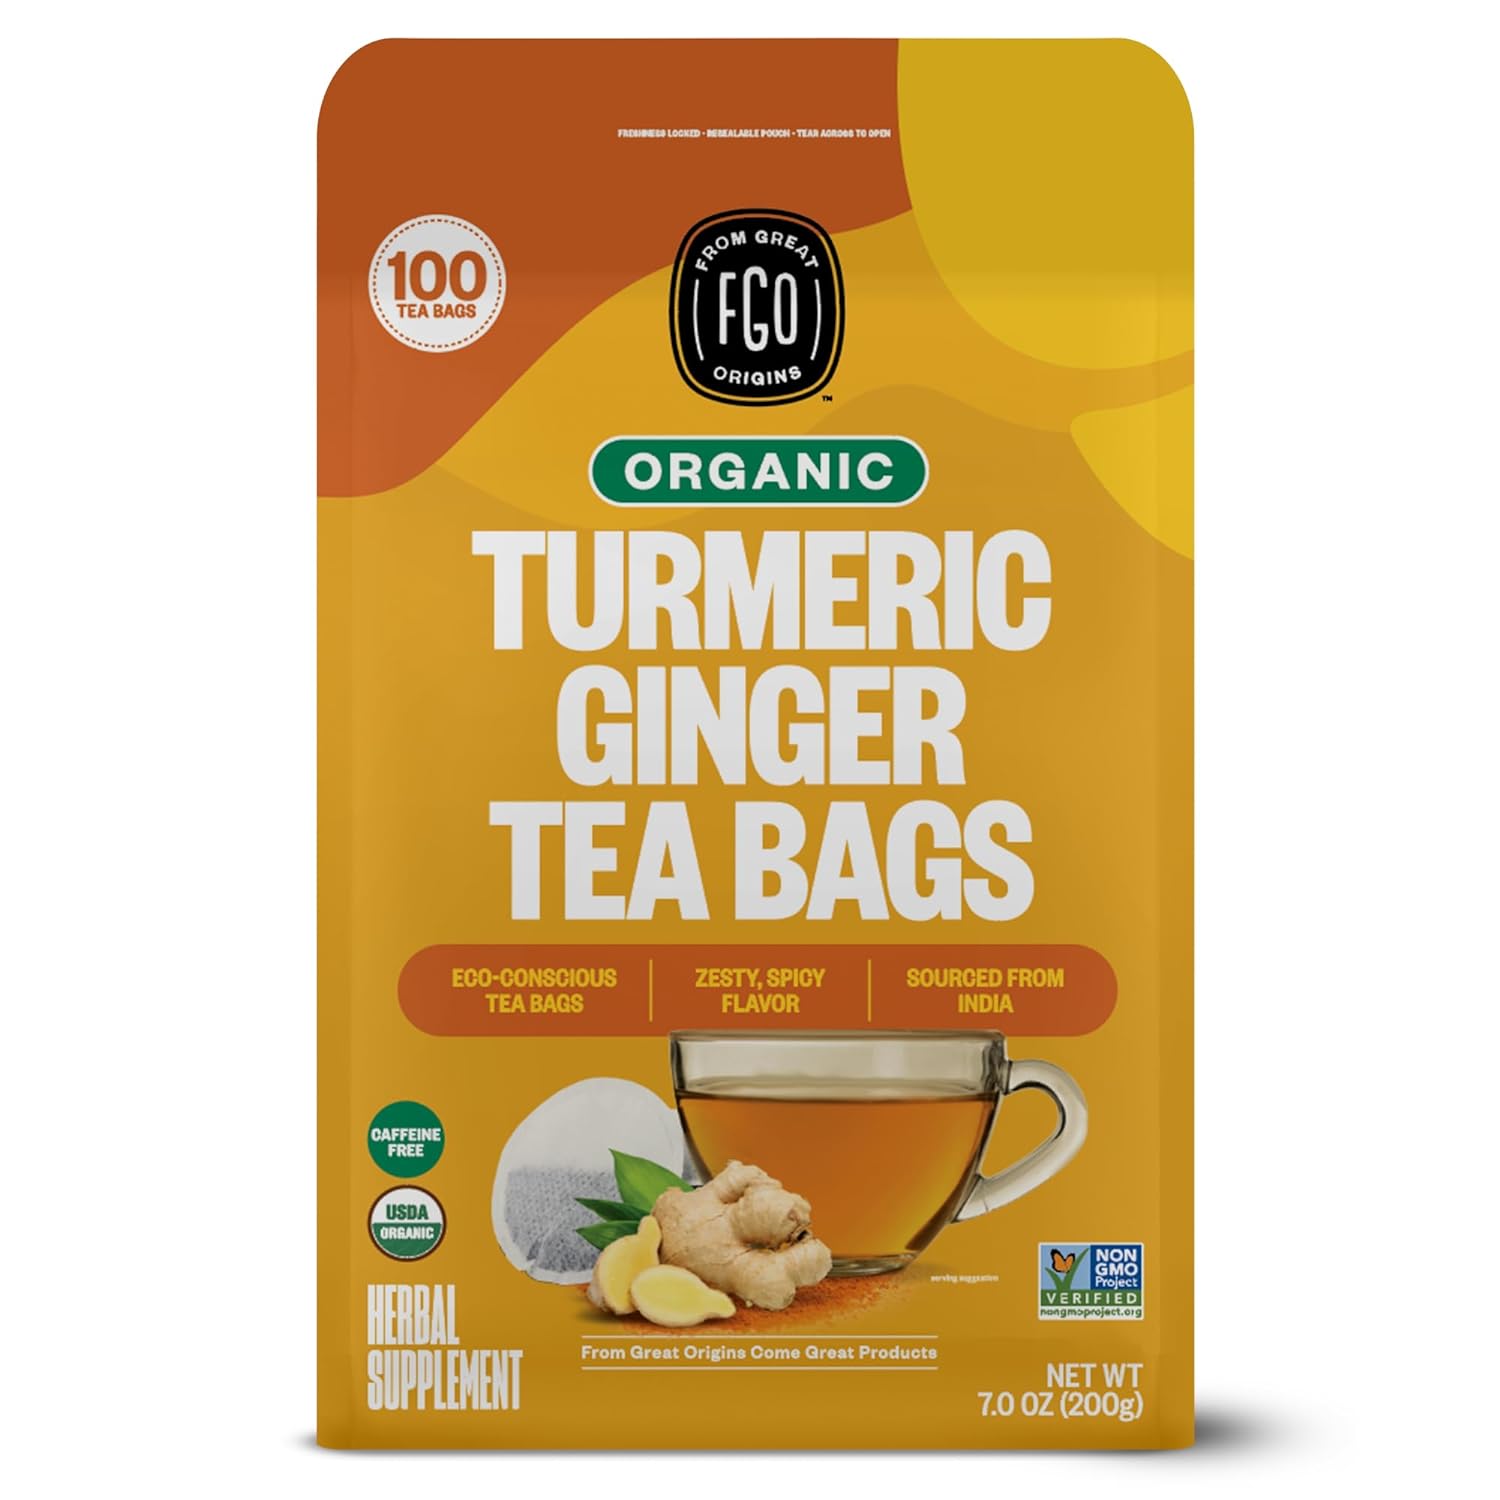 I love these tea bags. I've been buying them for years now. this is my favorite of all teas. the only issue is, the boldness of the flavor is hit or miss. the ginger is supposed to be bold and spicy. hot to the taste. I purchased this bag of 100, and the tea bags are neither spicy or bold. they taste like regular lipton tea bags. I also purchased a bag of 20, and they are PERFECT! spicy and full-bodied. so just know when purchasing this item, you may get spicy in one order and bland in the other.